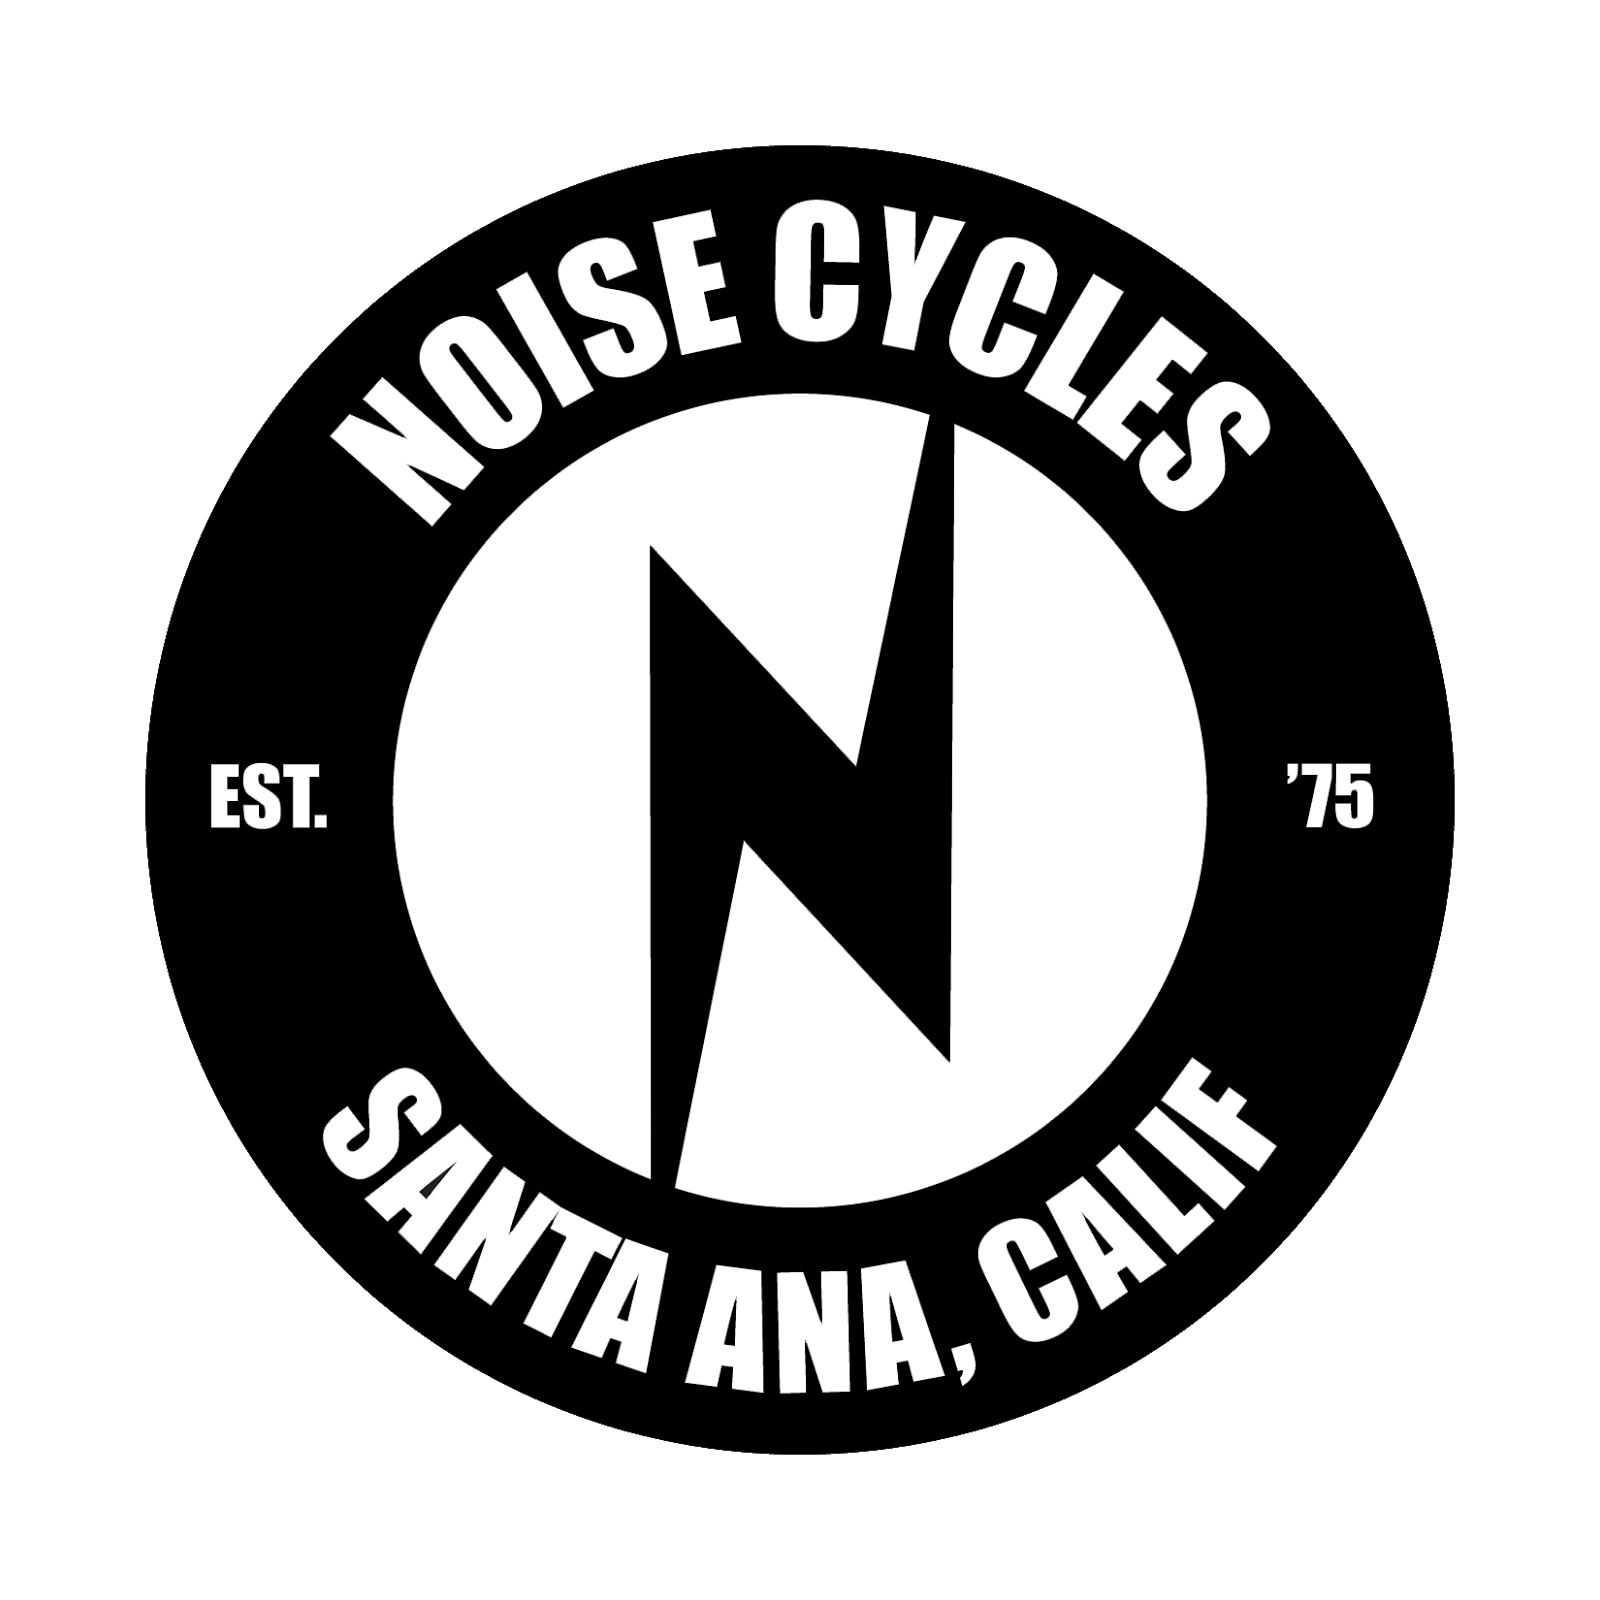 NOISE CYCLES